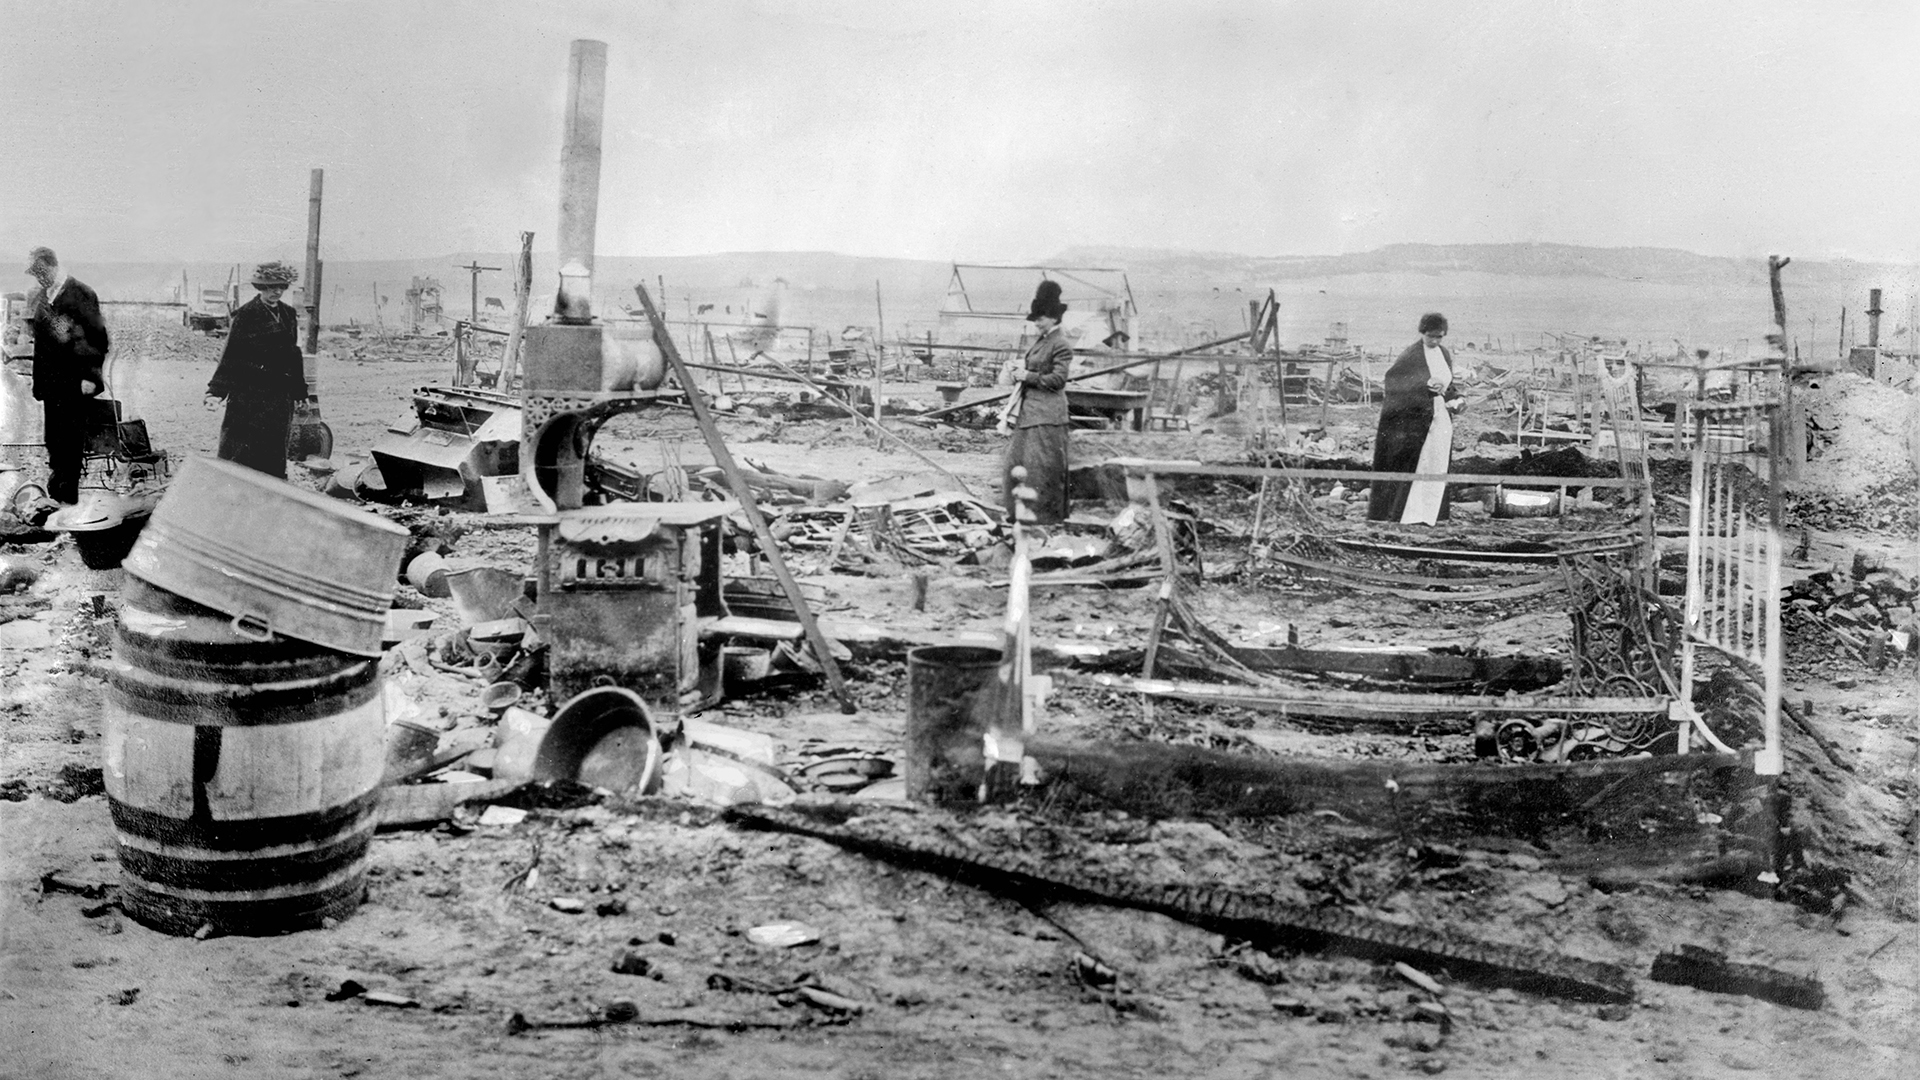 On April 20, 1914, tensions between striking miners and the Colorado National Guard erupted in Ludlow, Colorado. Militiamen destroyed the miners' tent city and killed 24 people, about half of whom were children.